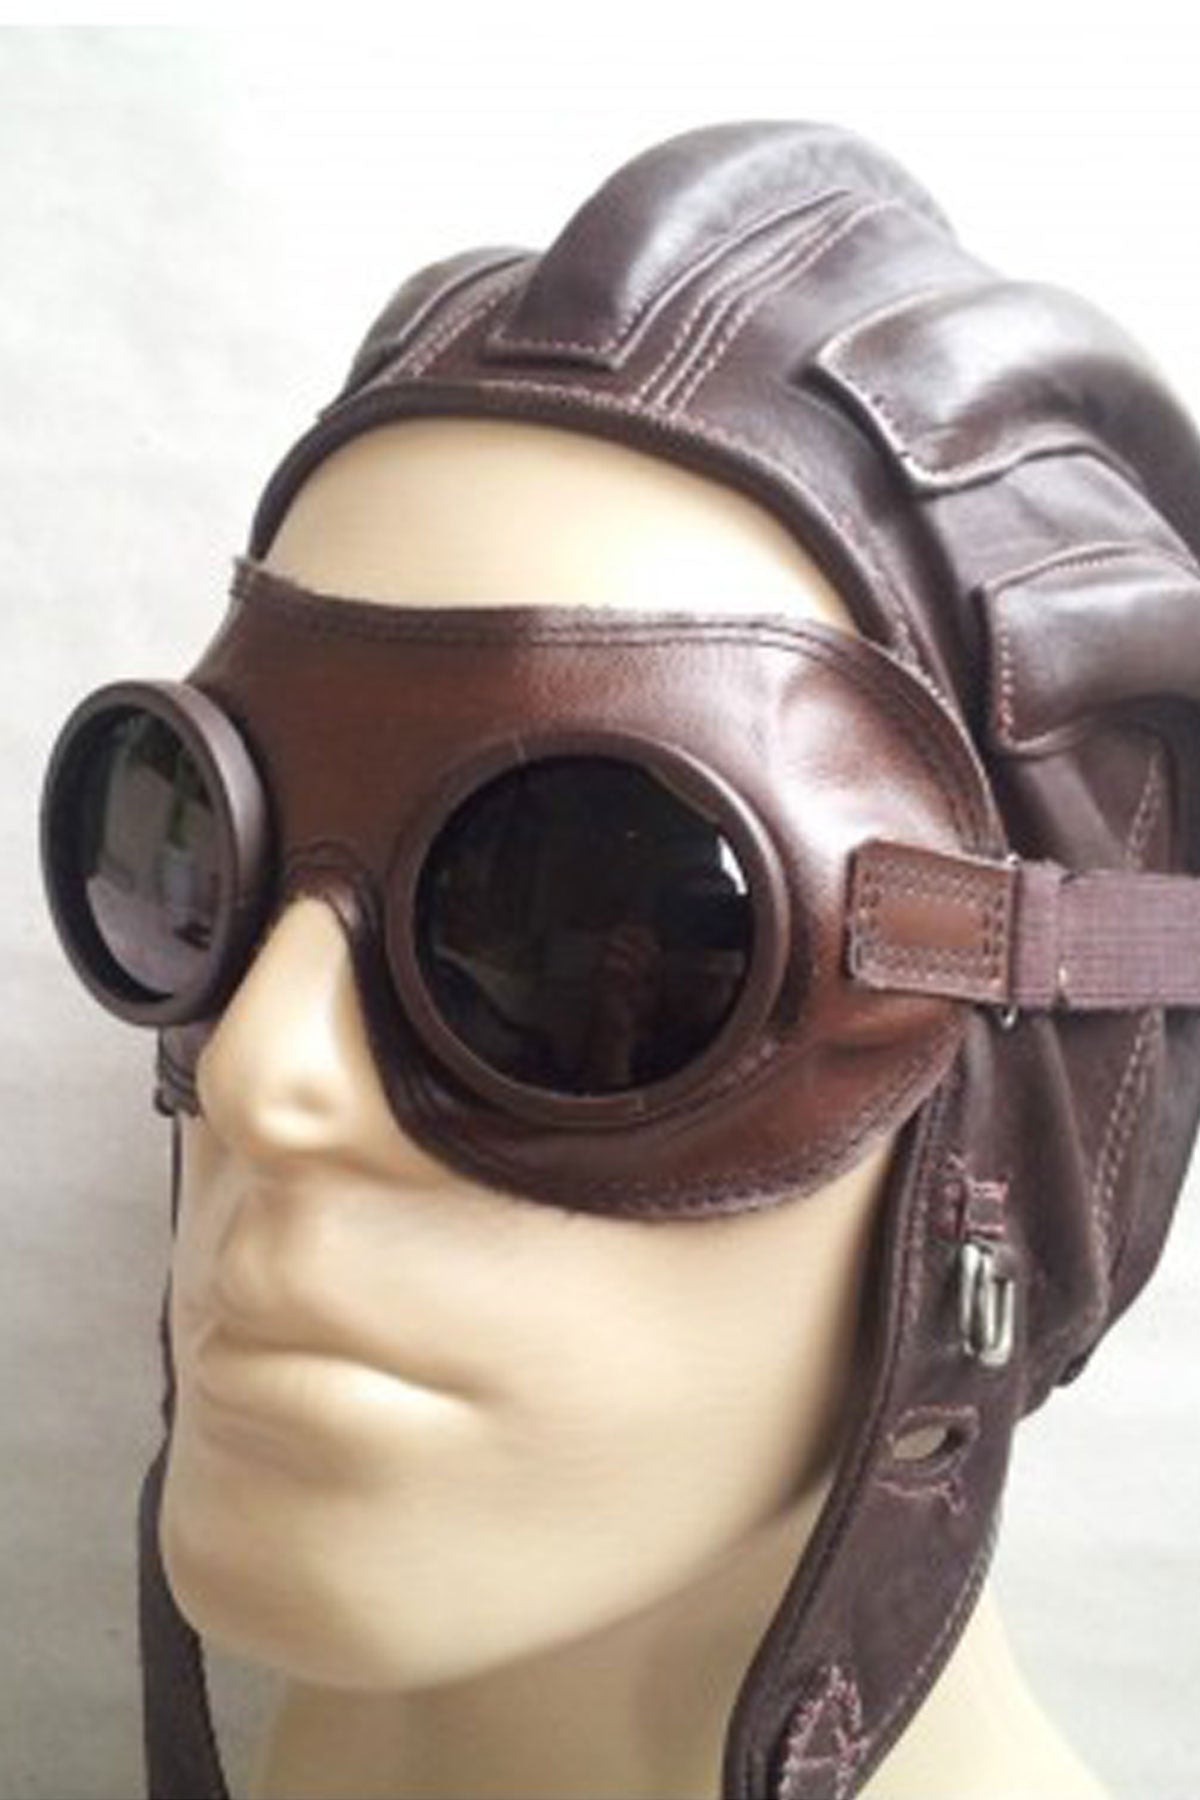 1960's Original USSR Dust Field Motorcycle Goggles with metal case